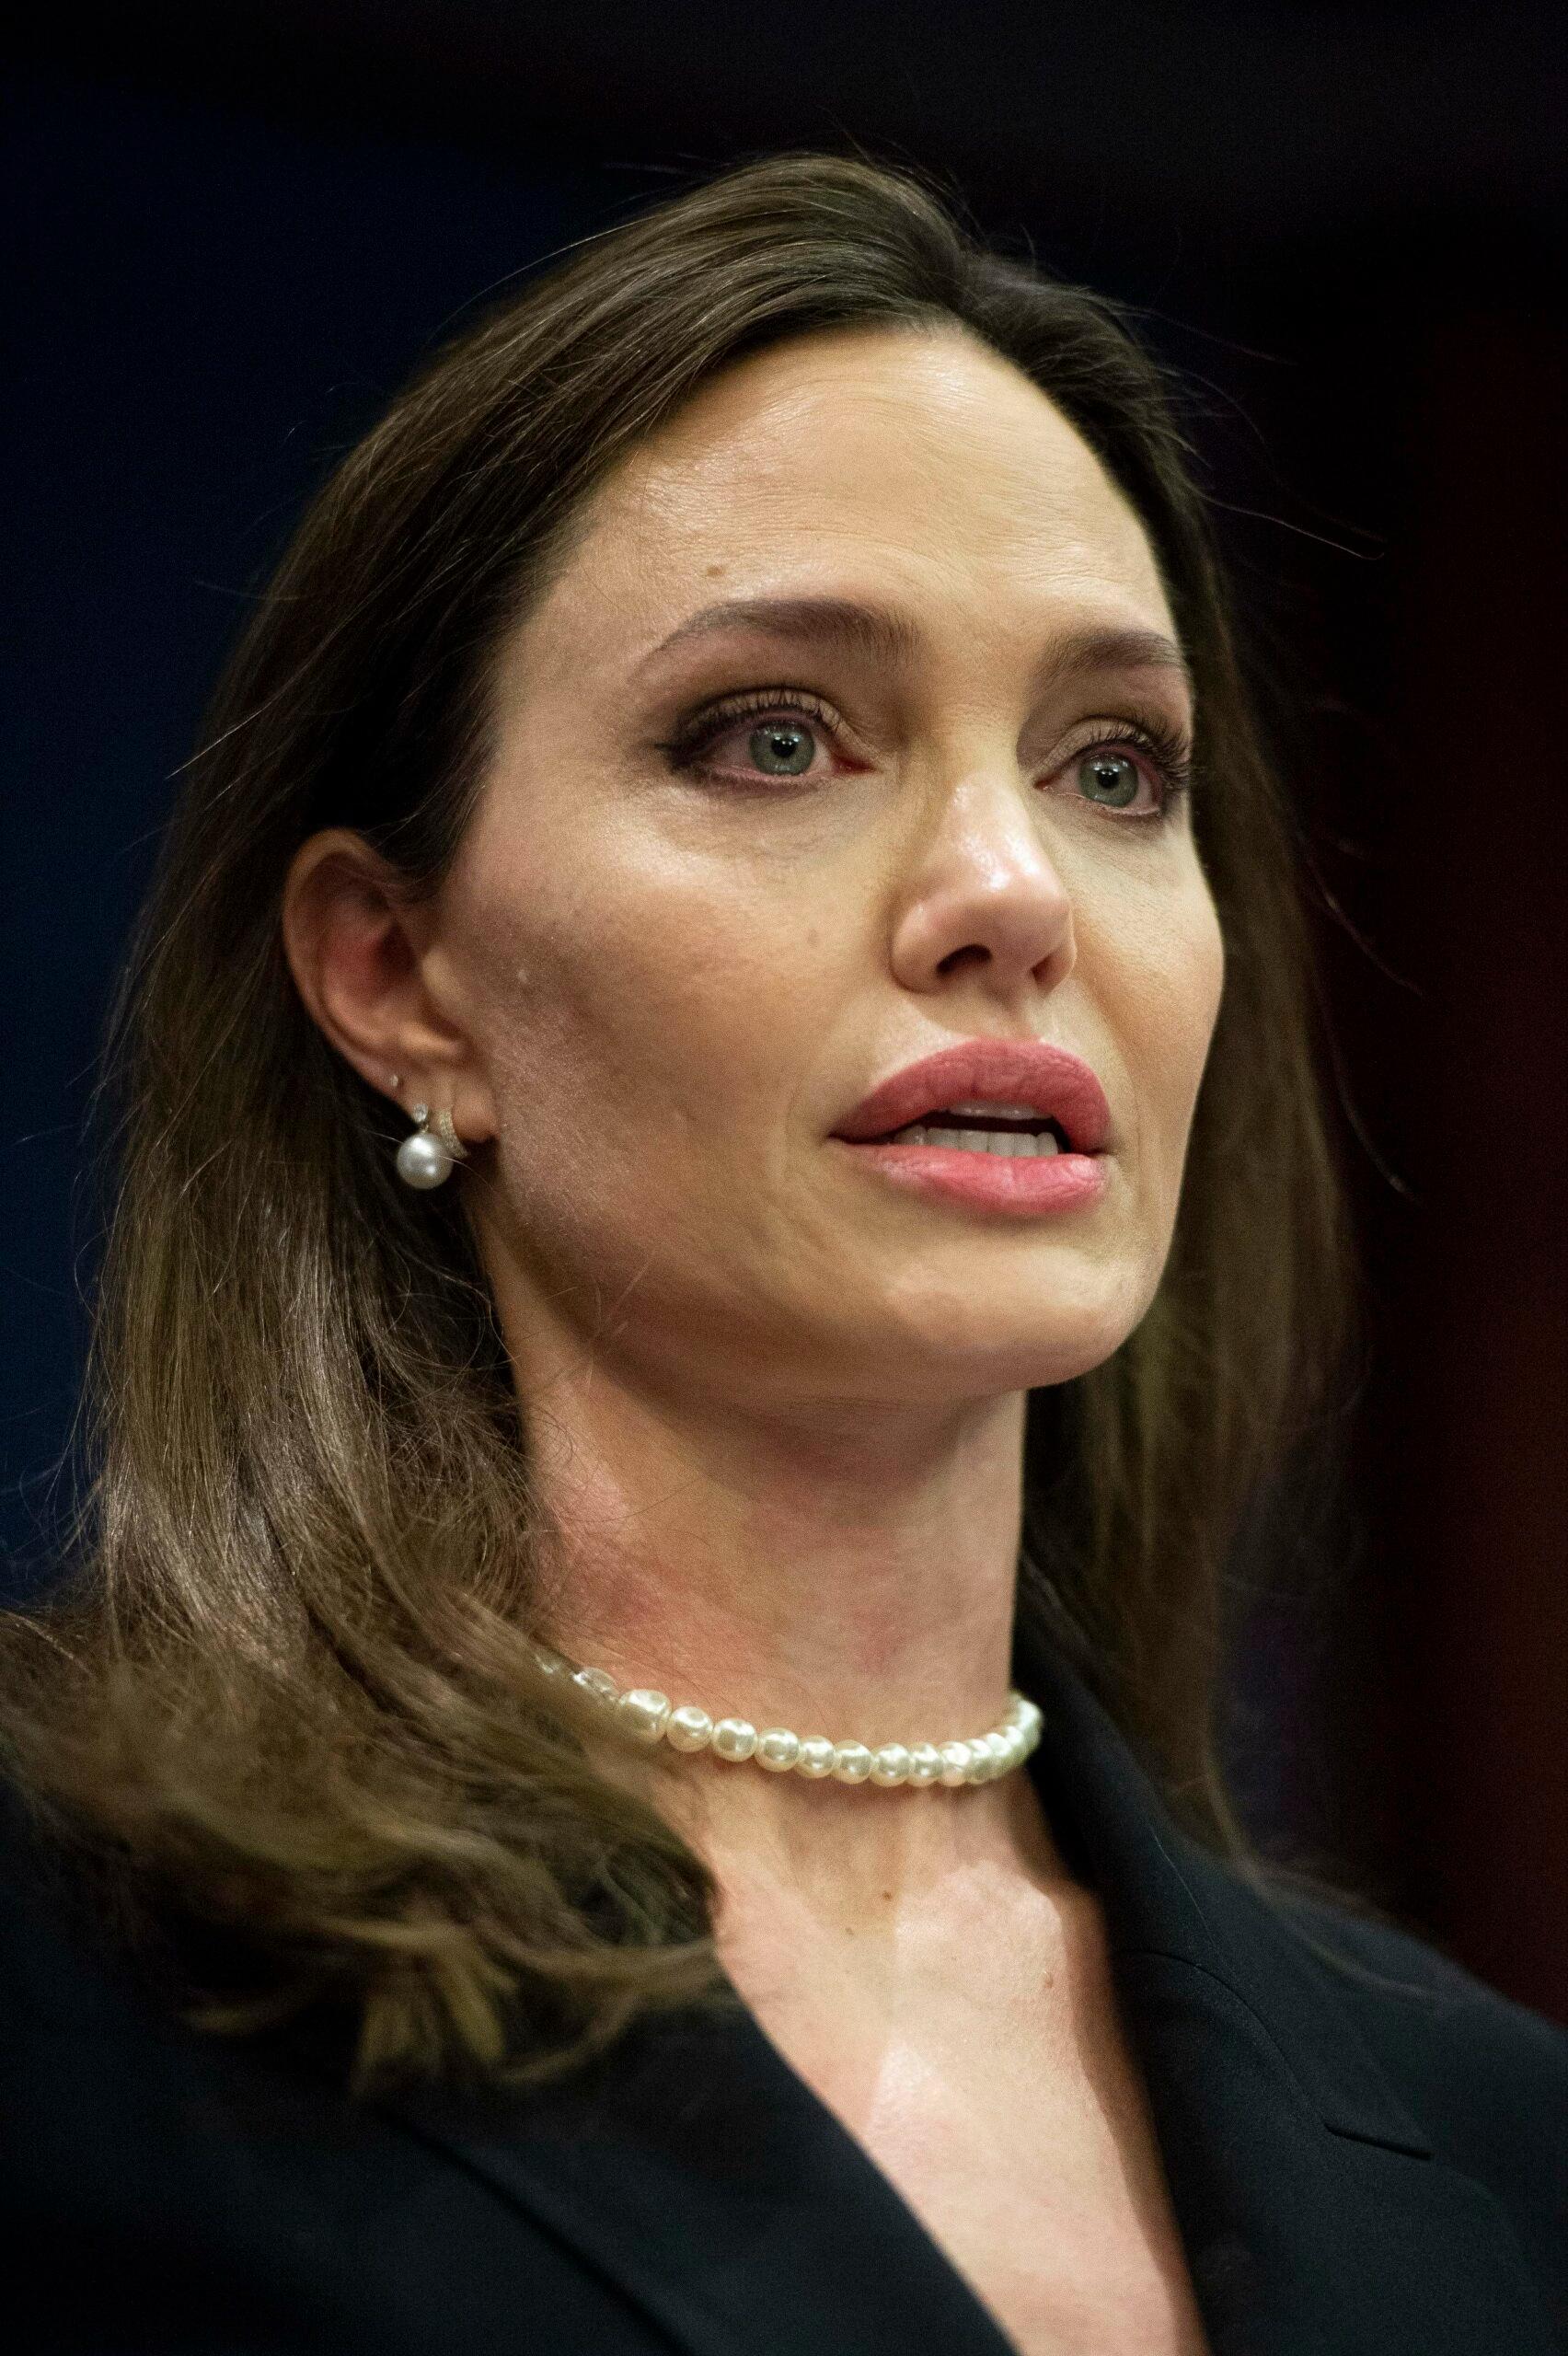 Actress Angelina Jolie speaks during a press conference announcing the bipartisan updated Violence Against Women Act VAWA at the US Capitol in Washington DC on Wednesday February 9 2022